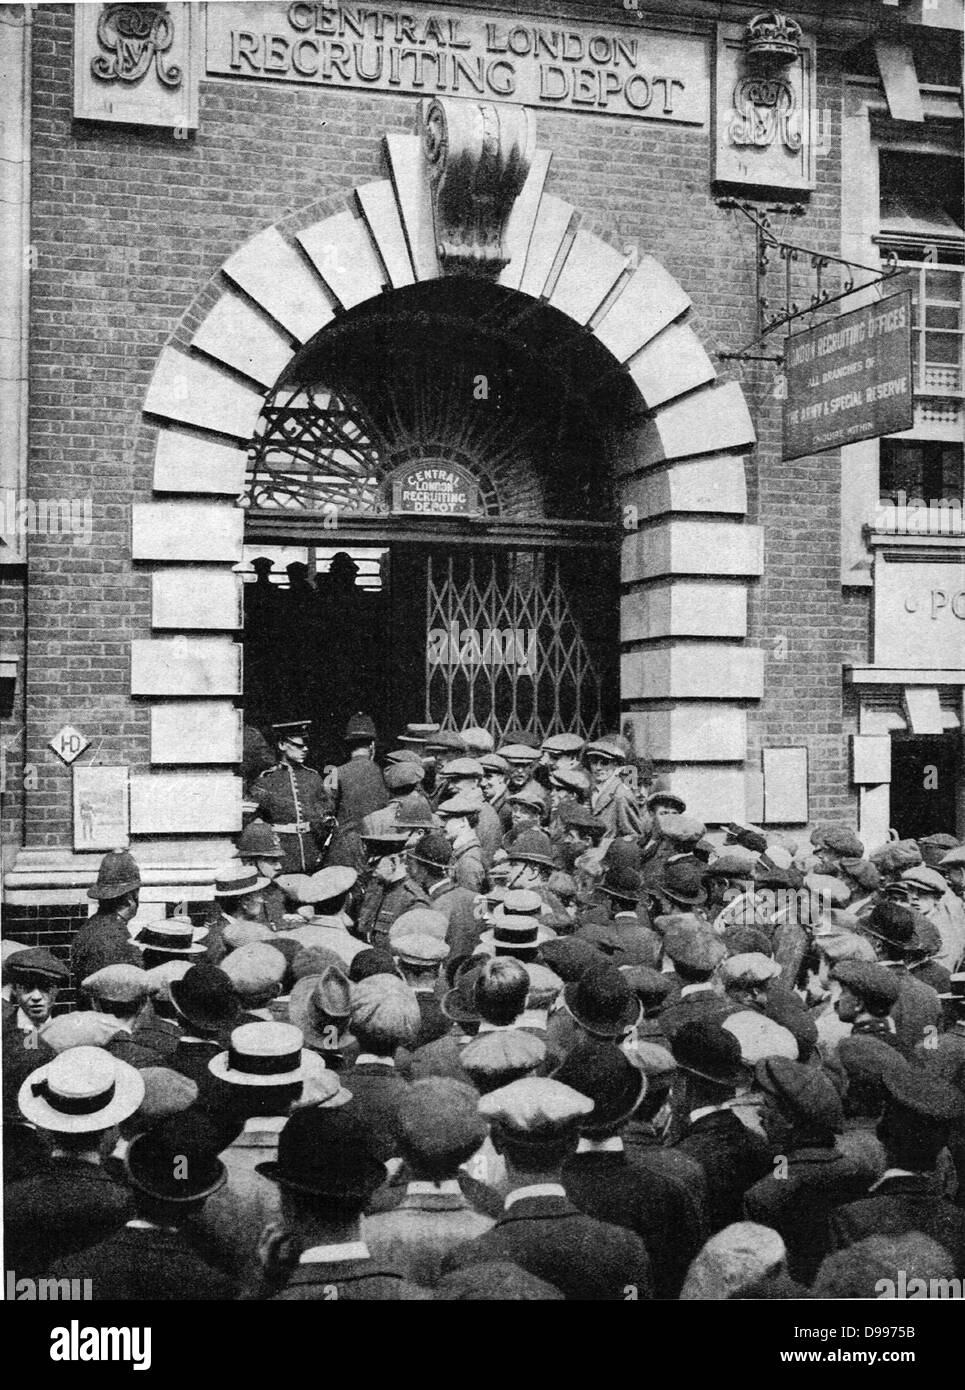 Central London Recruiting depot during World War I 1914 Stock Photo